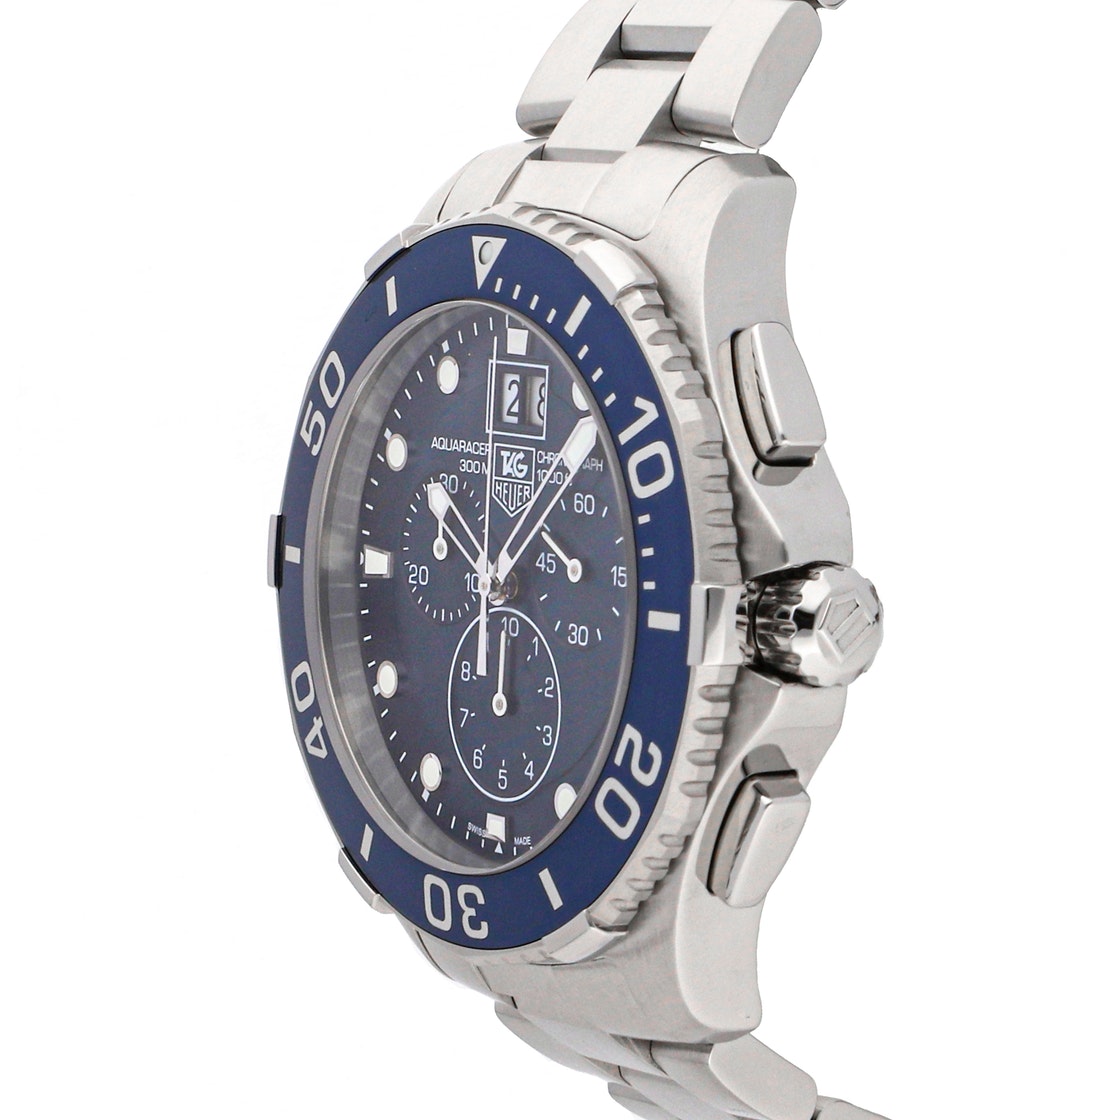 

Tag Heuer Blue Stainless Steel Aquaracer Chronograph CAN1011.BA0821 Men's Wristwatch 43 MM